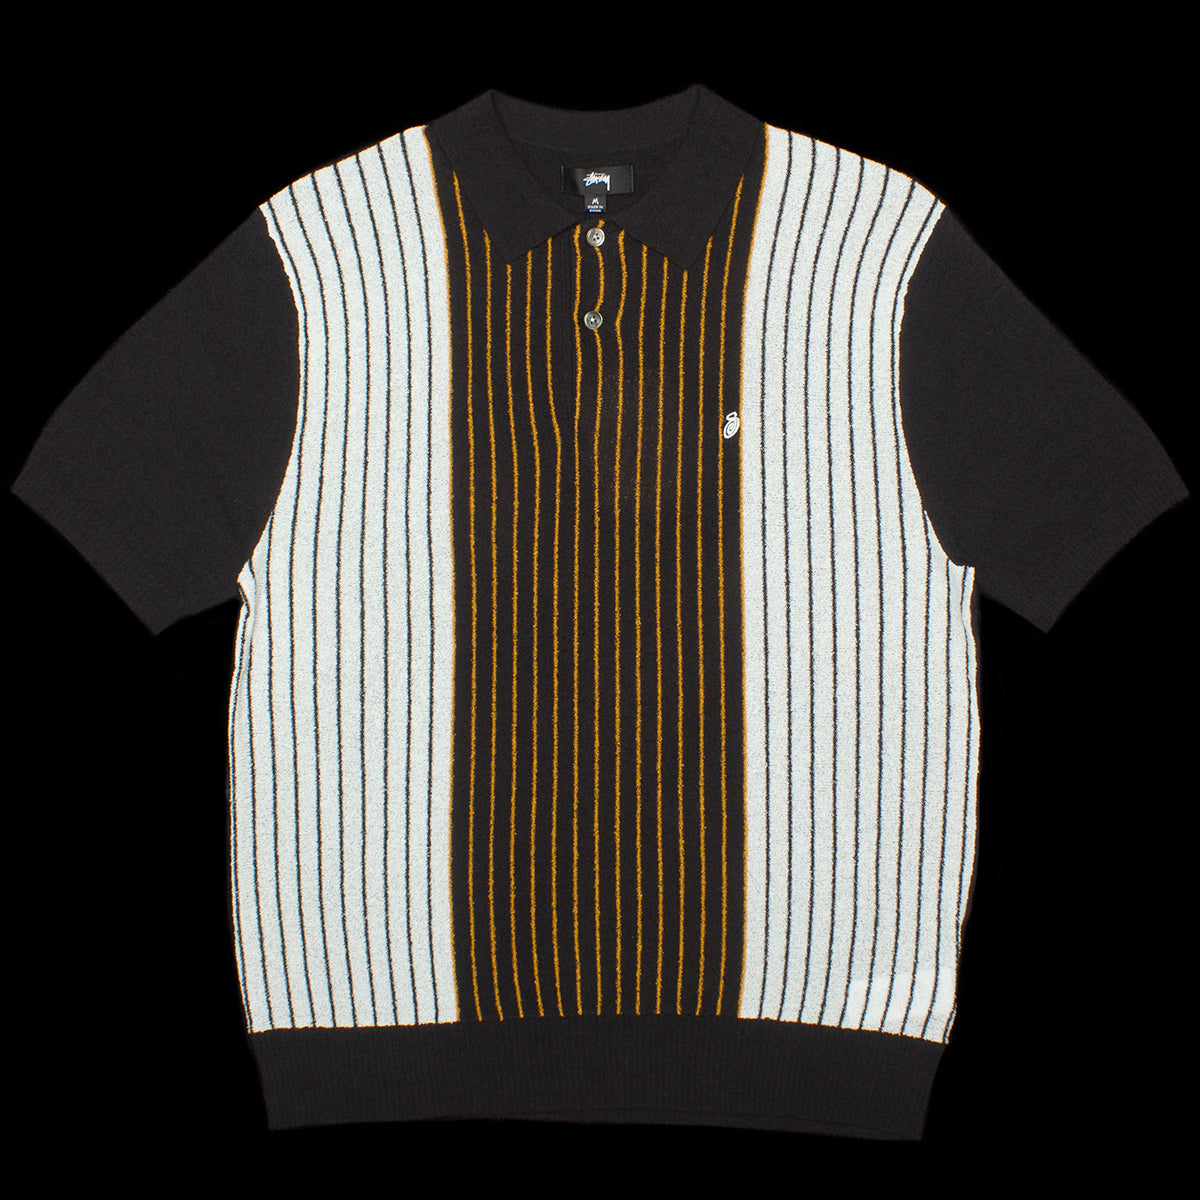 Stussy Textured S/S Polo Sweater Style # 117167 Color : Black Stripe